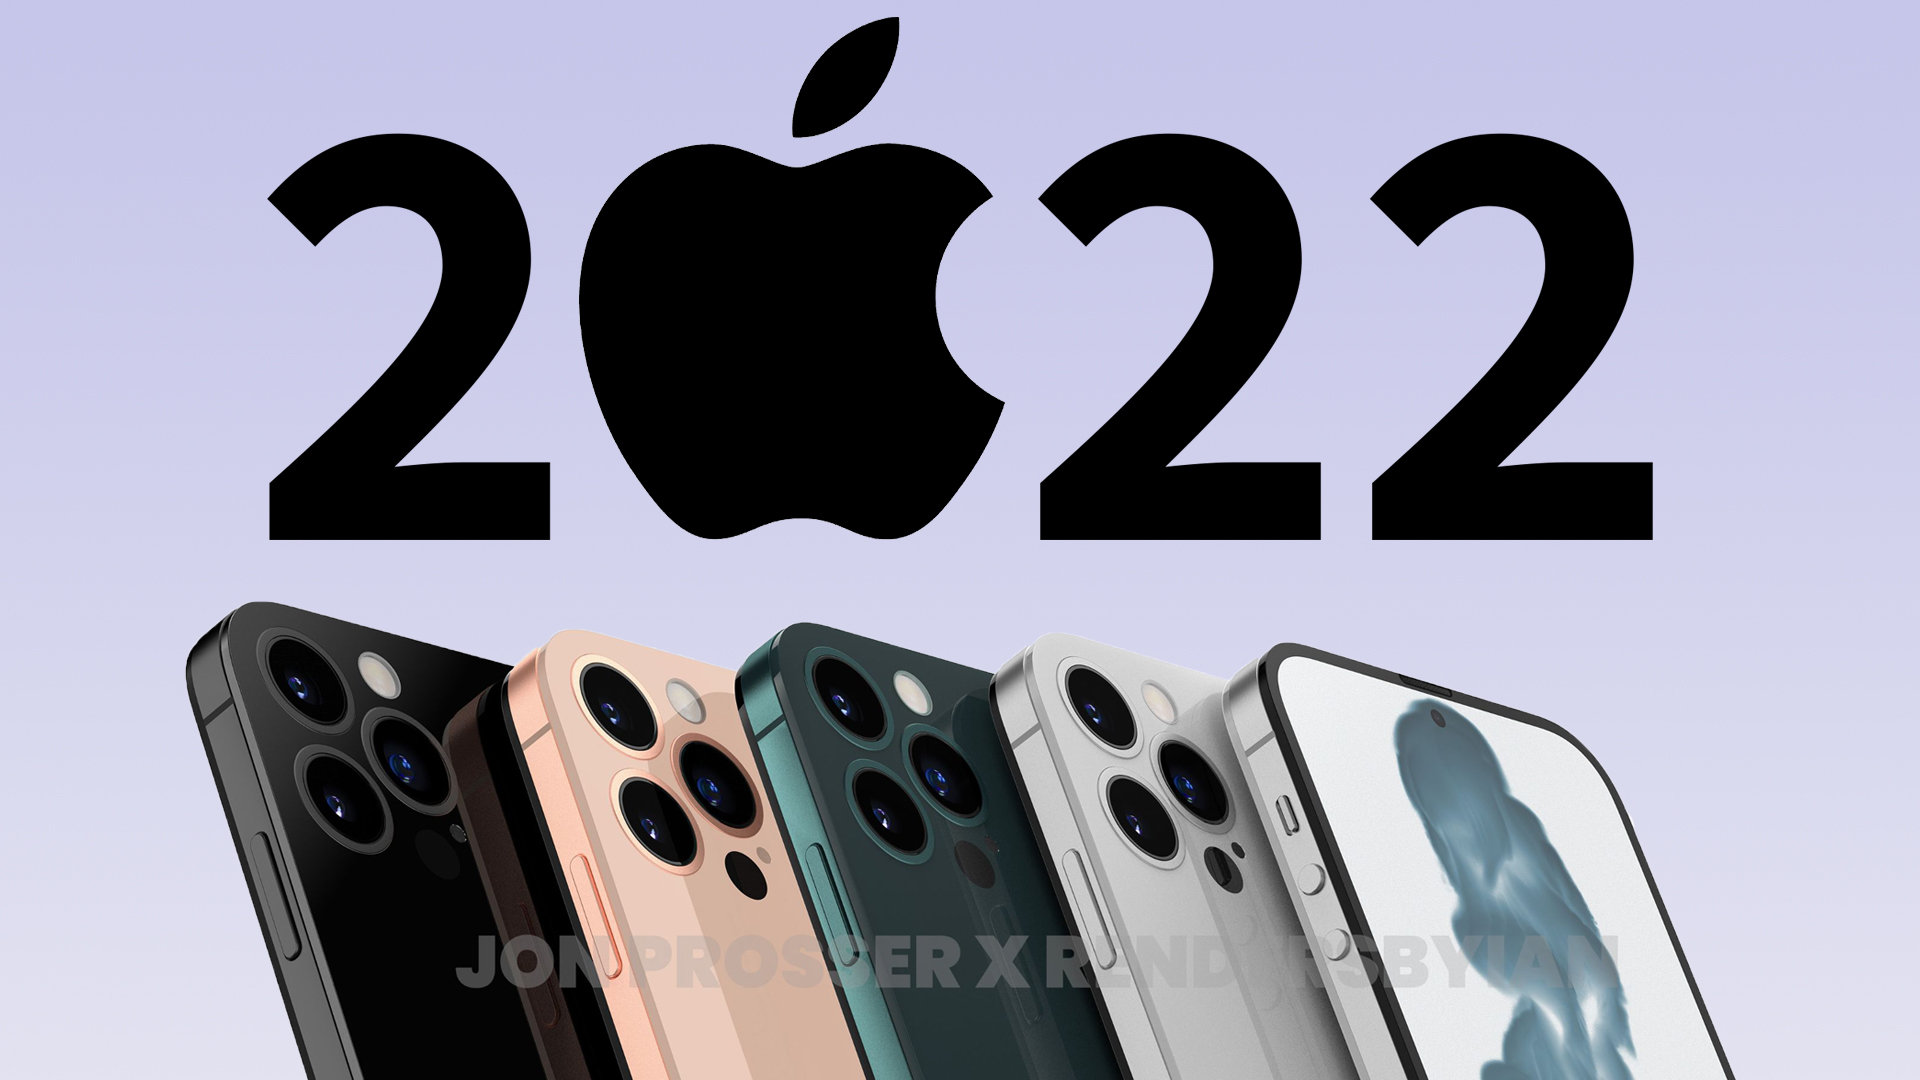 iPhone 14 release date speculation: Here’s when we could see the new iPhone